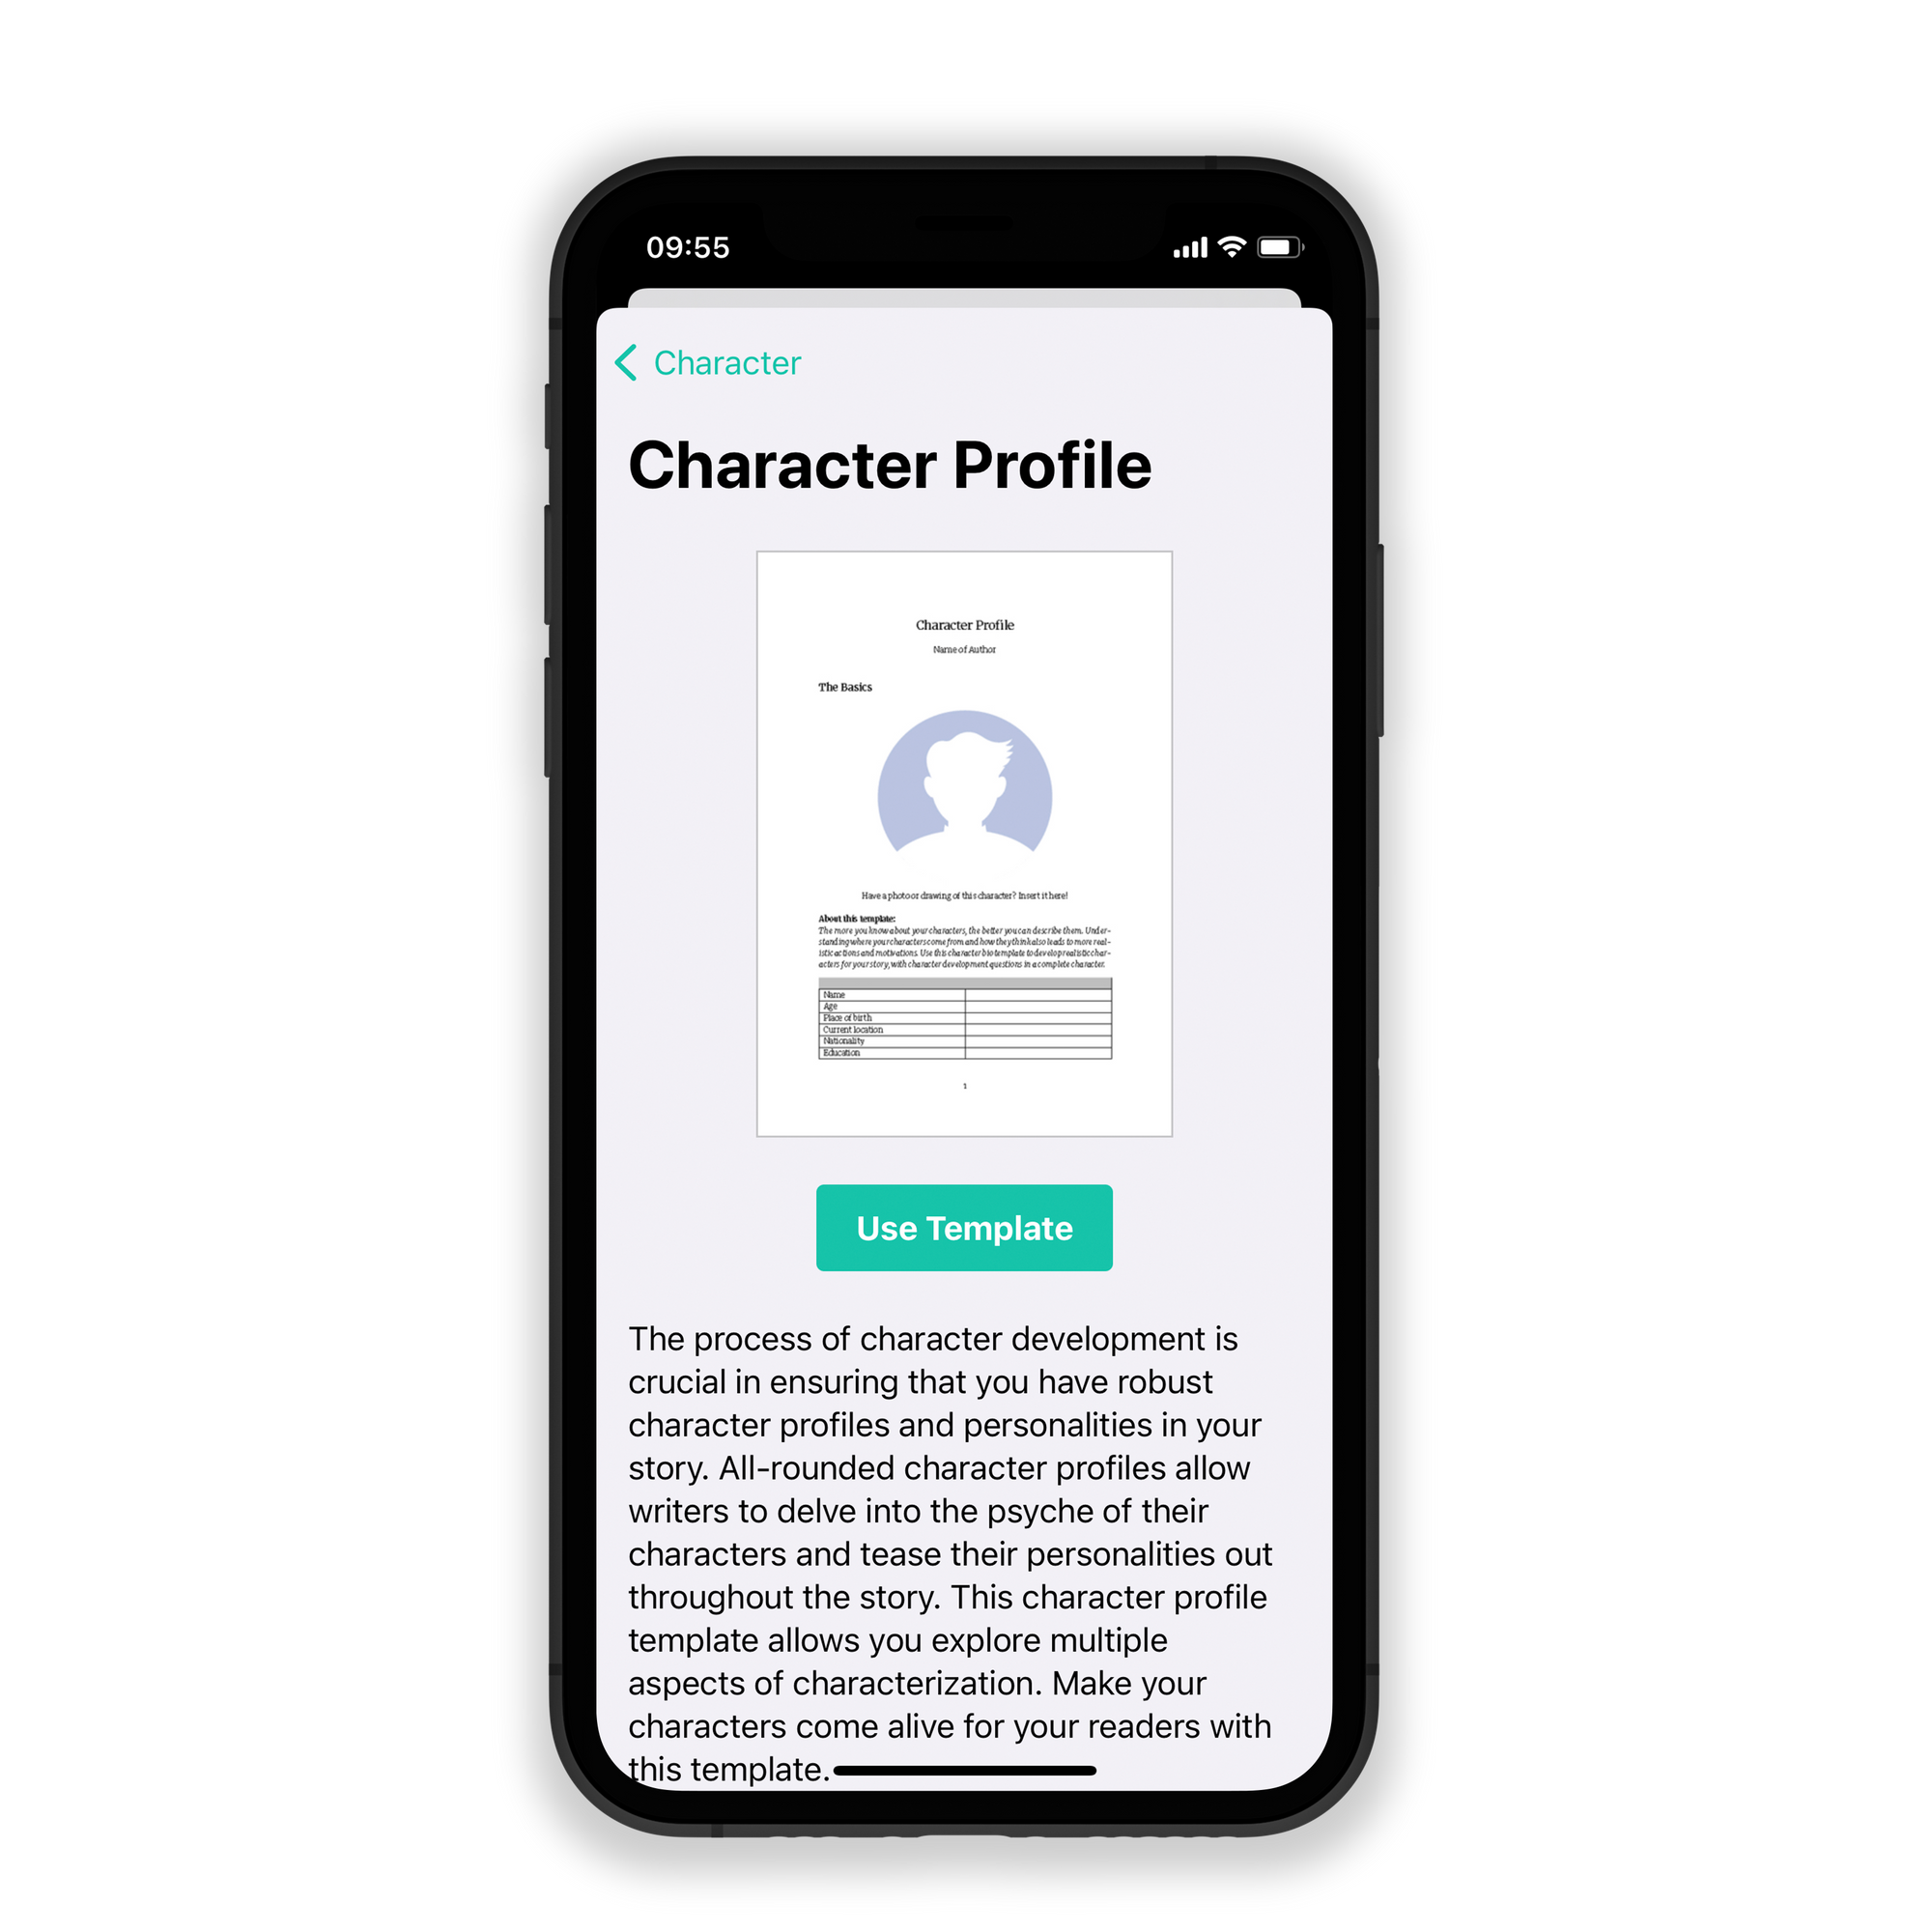 Character profile templates you can fill up to develop your characters on JotterPad.